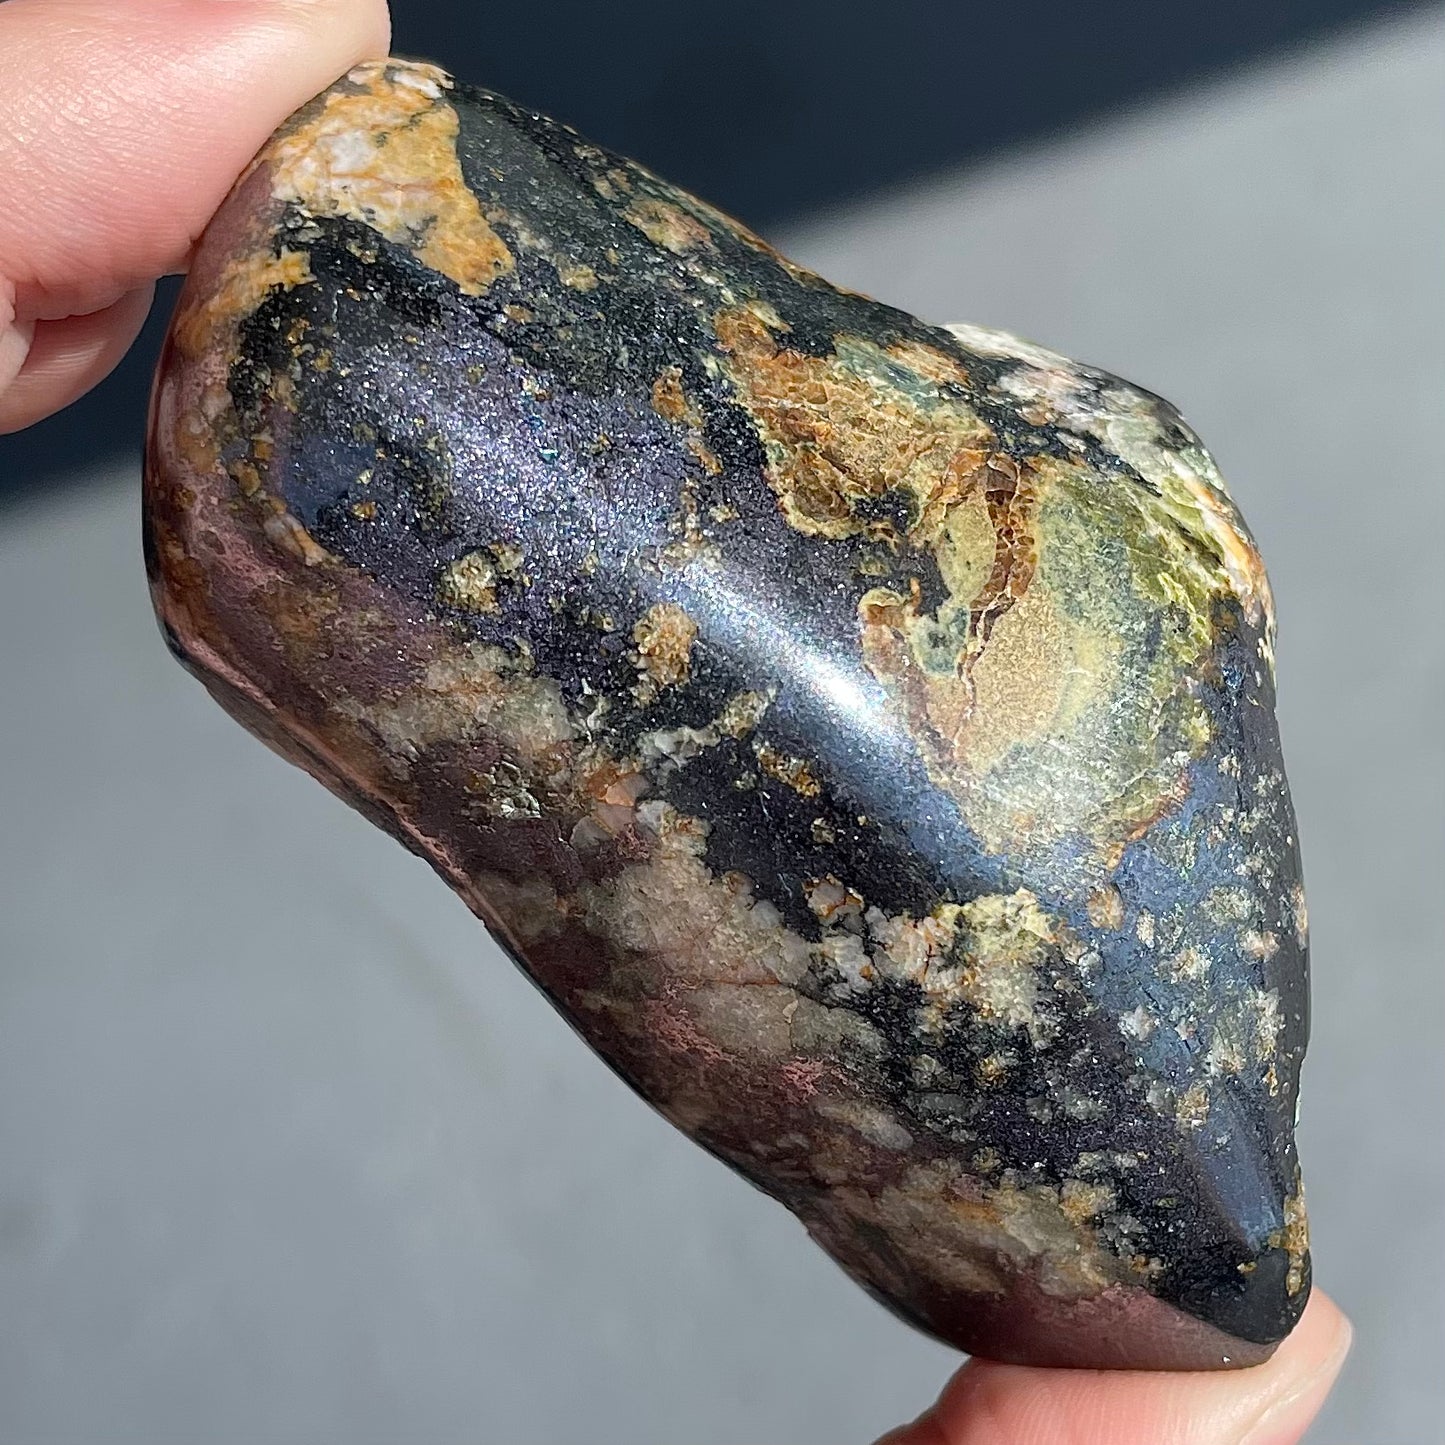 A polished copper specimen with pyrite inclusions.